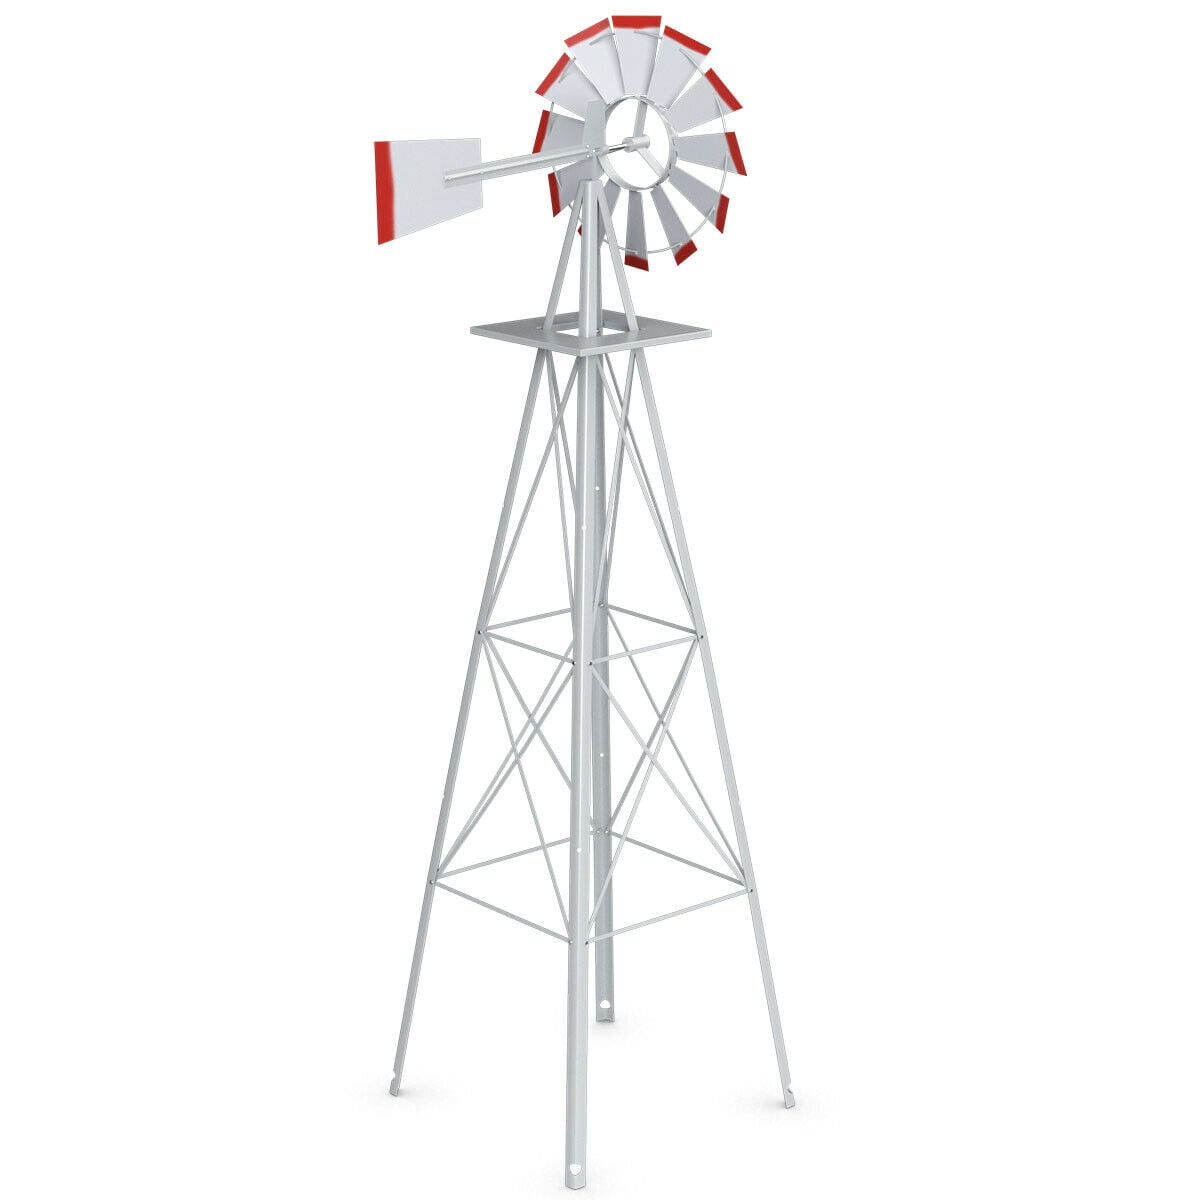 New 8Ft Tall Windmill Ornamental Wind Wheel Silver Gray And Red Garden Weather Vane